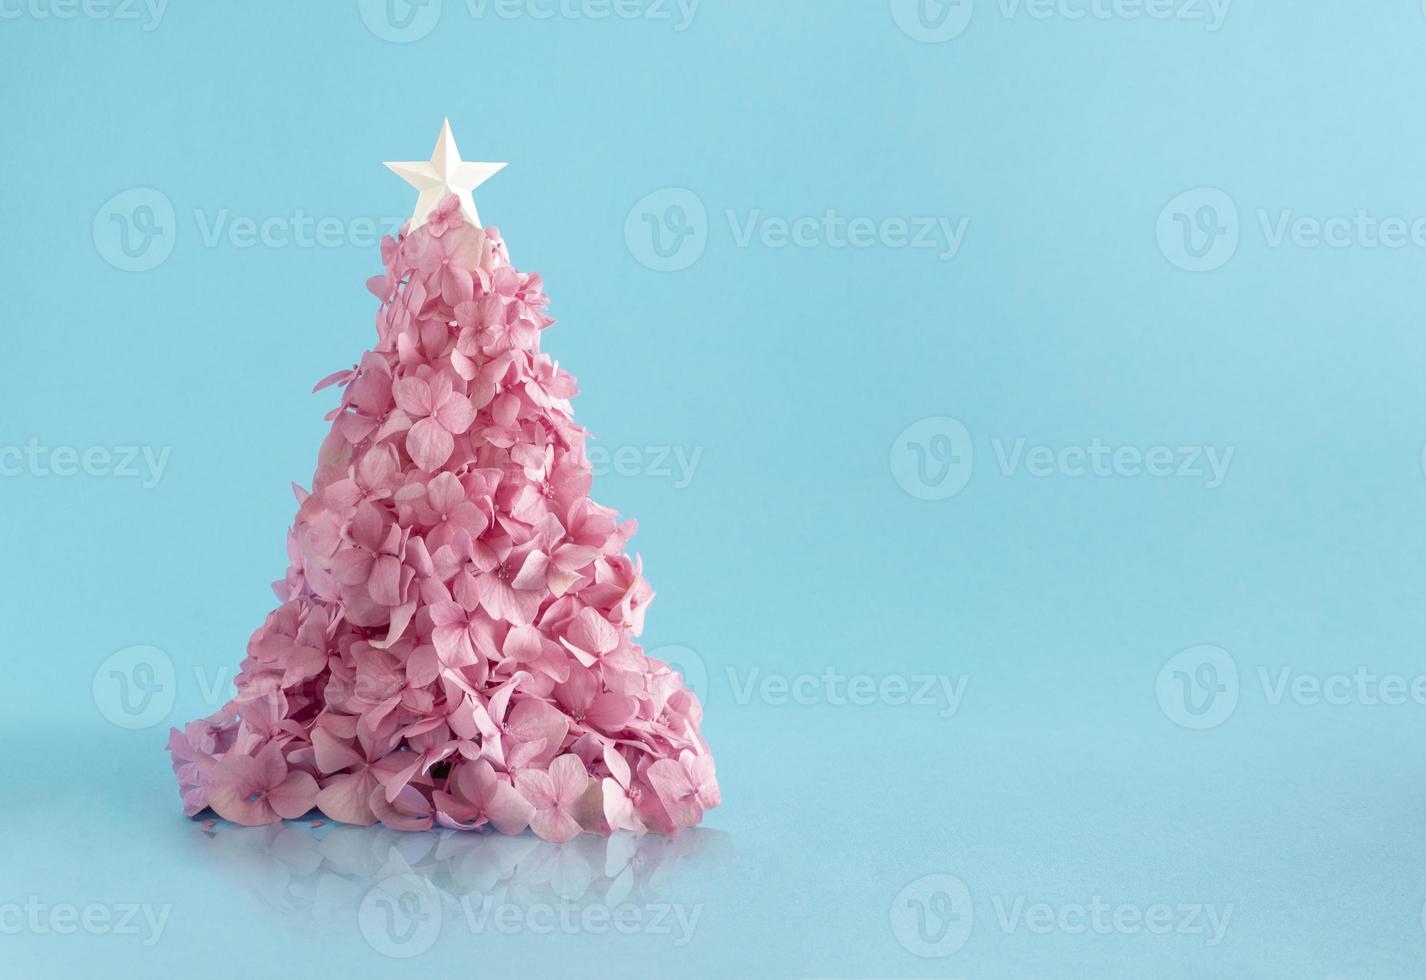 Christmas tree made of a small pink flowerers against light blue background. Minimal flat lay composition. photo